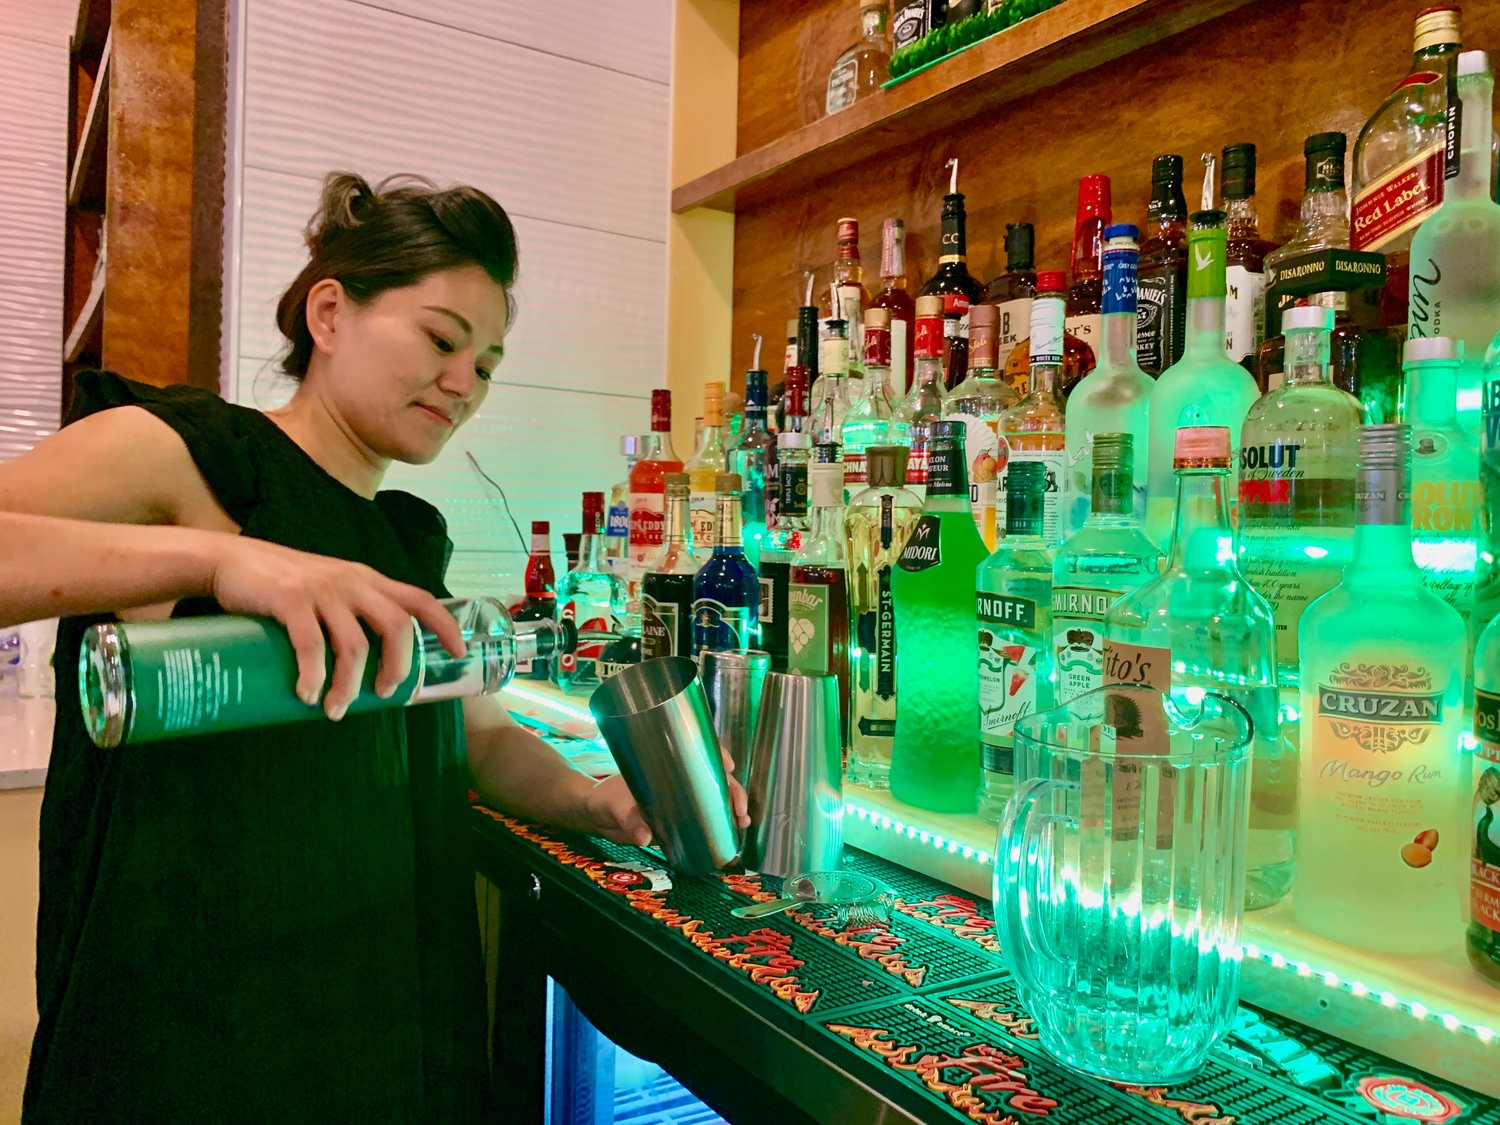 Mindy Zhang, owner of Mindy’s Restaurant and Sushi Bar in Portsmouth, pours a drink at the bar on Tuesday. The establishment, which recently opened, is the former site of Reidy’s Family Restaurant.